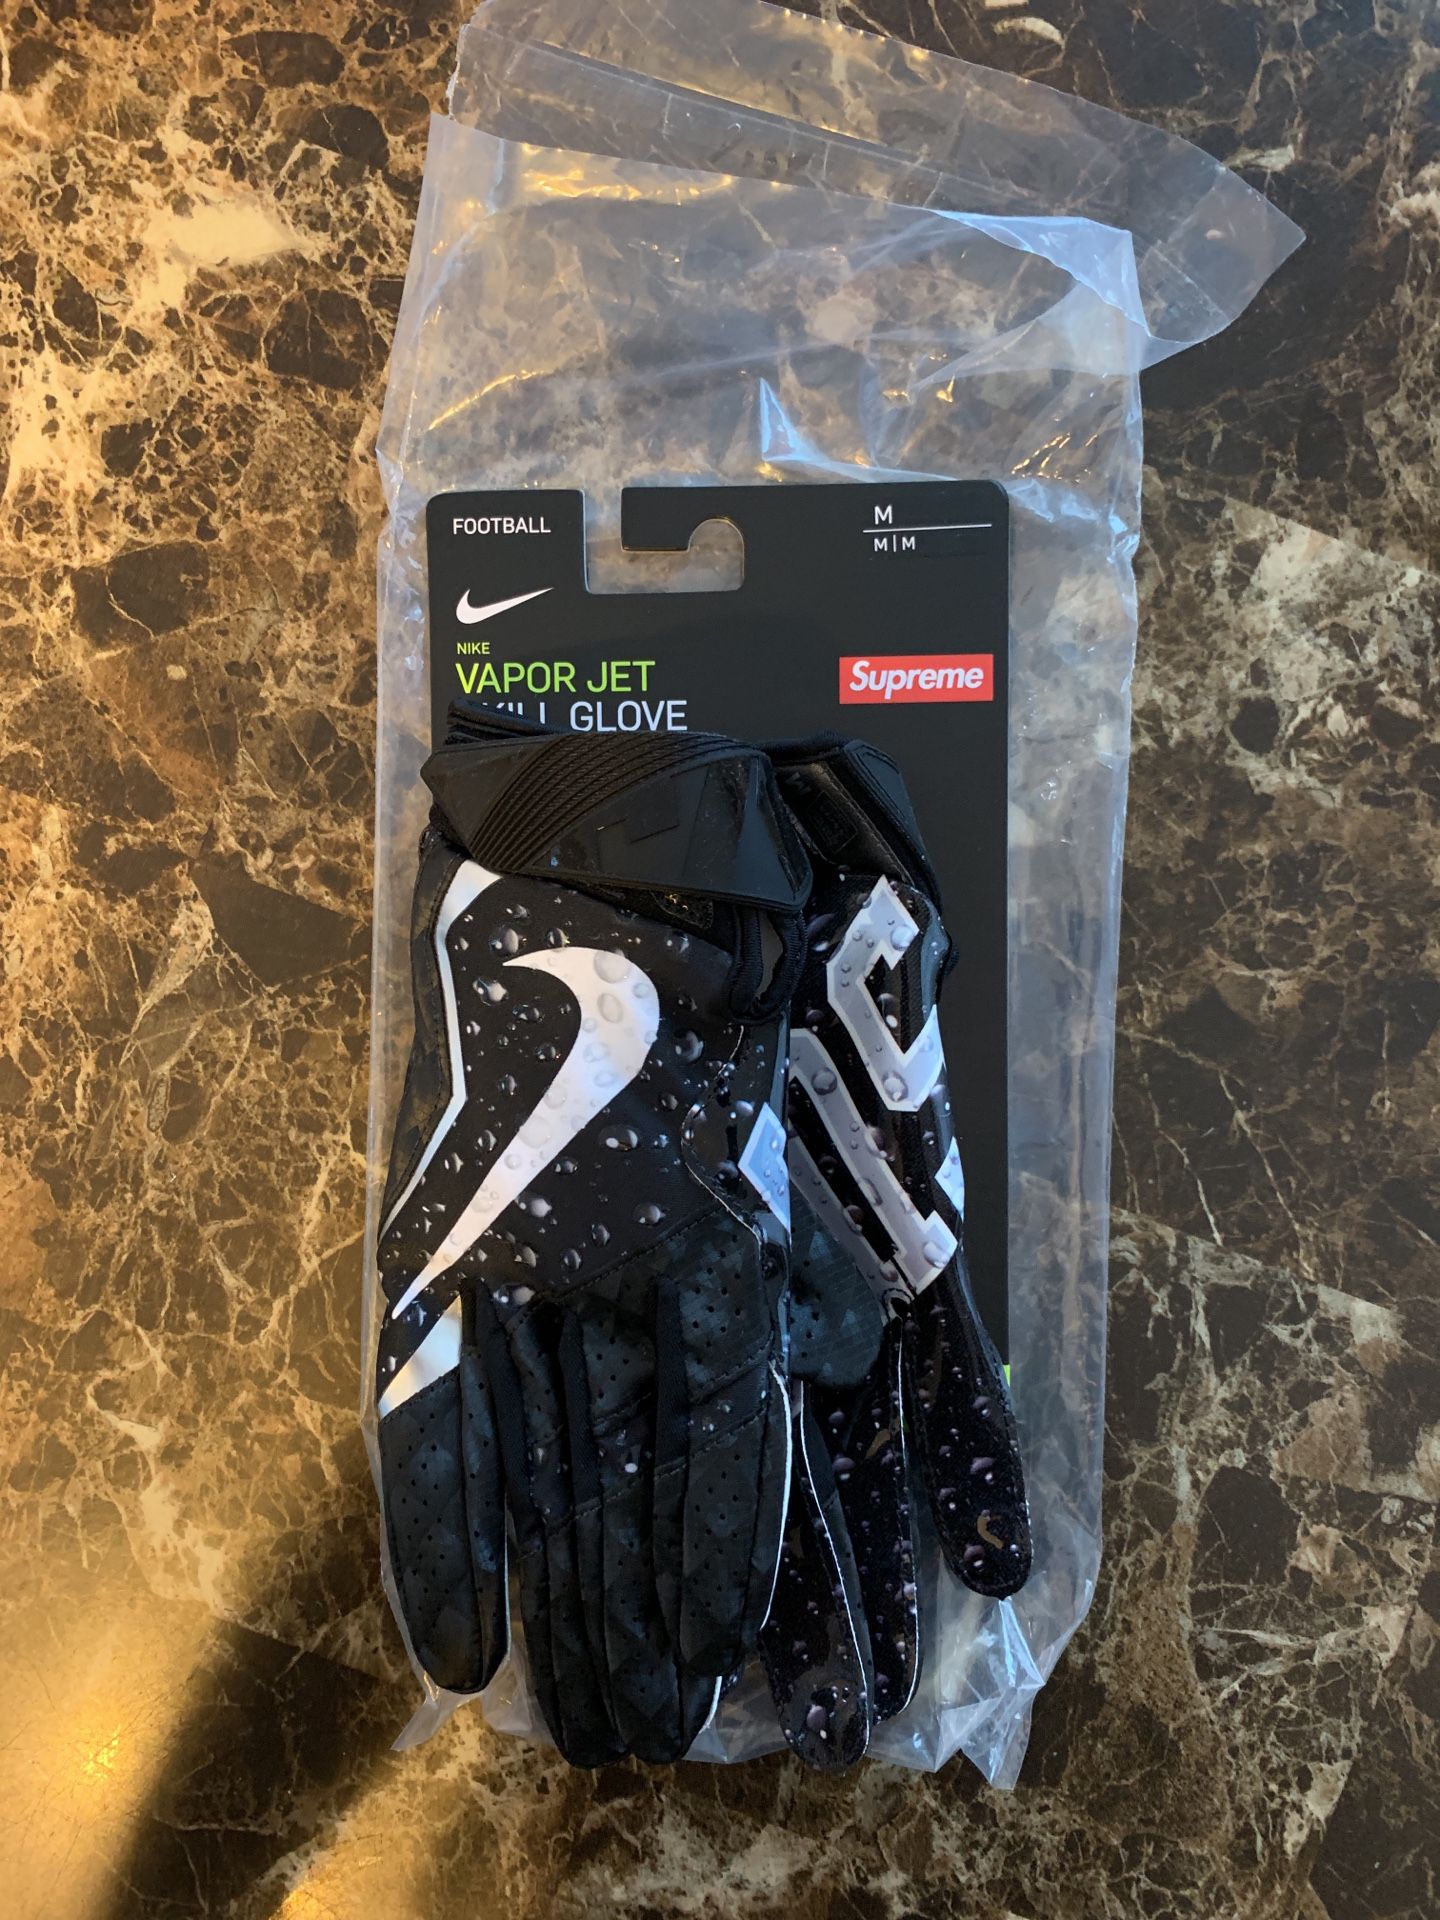 Supreme vapor jet football gloves New for Sale in Greensboro, NC - OfferUp